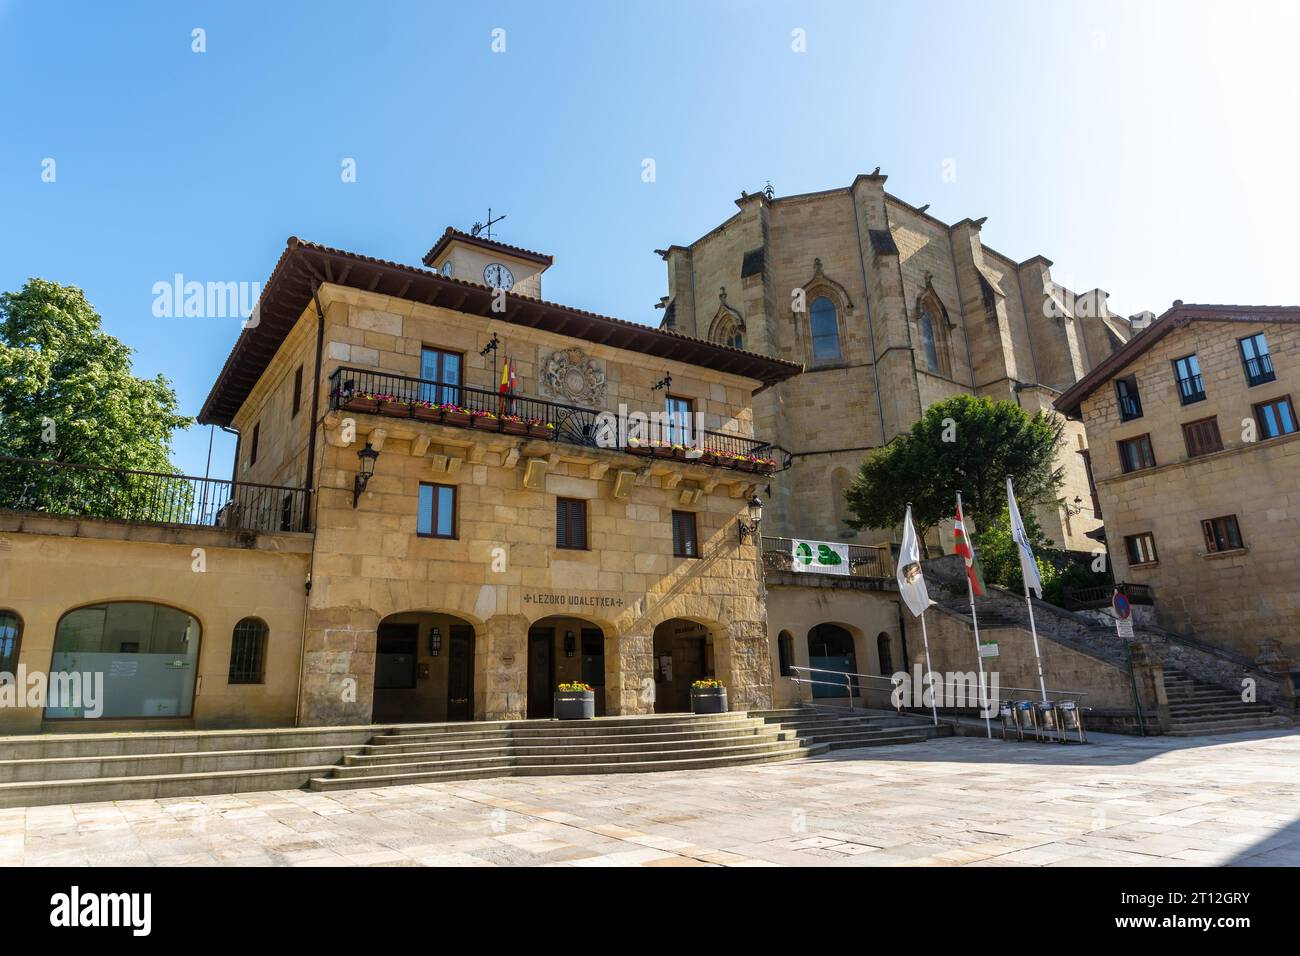 Town square with the town hall in the municipality of Lezo, the small coastal town in the province of Gipuzkoa, Basque Country. Spain Stock Photo